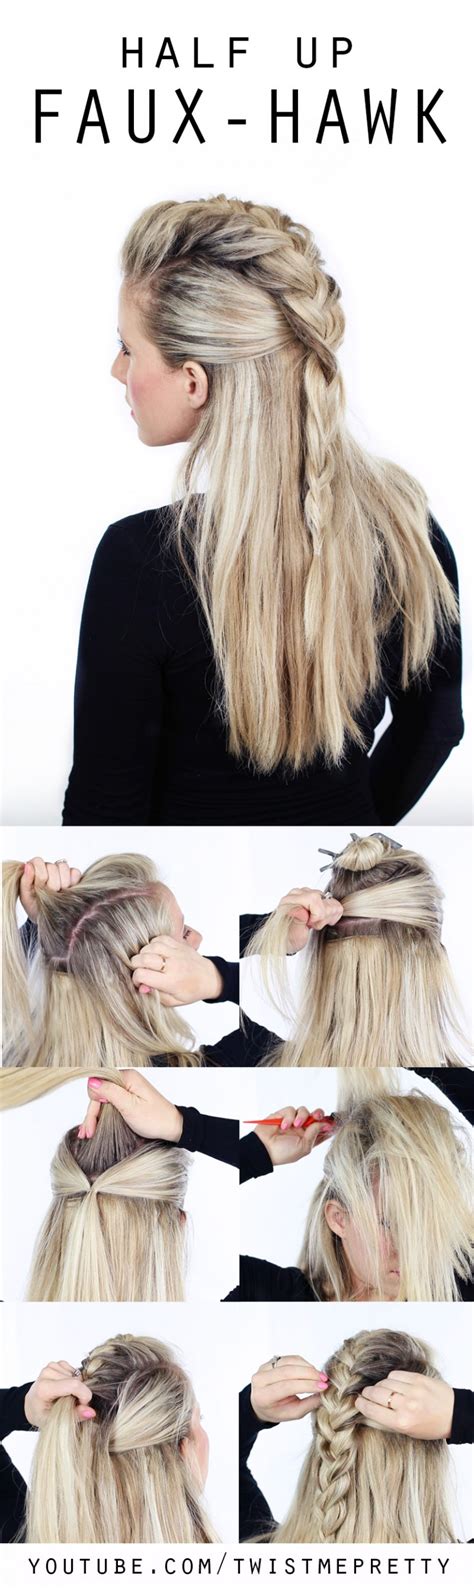 15 super easy half up hairstyle tutorials you have to try